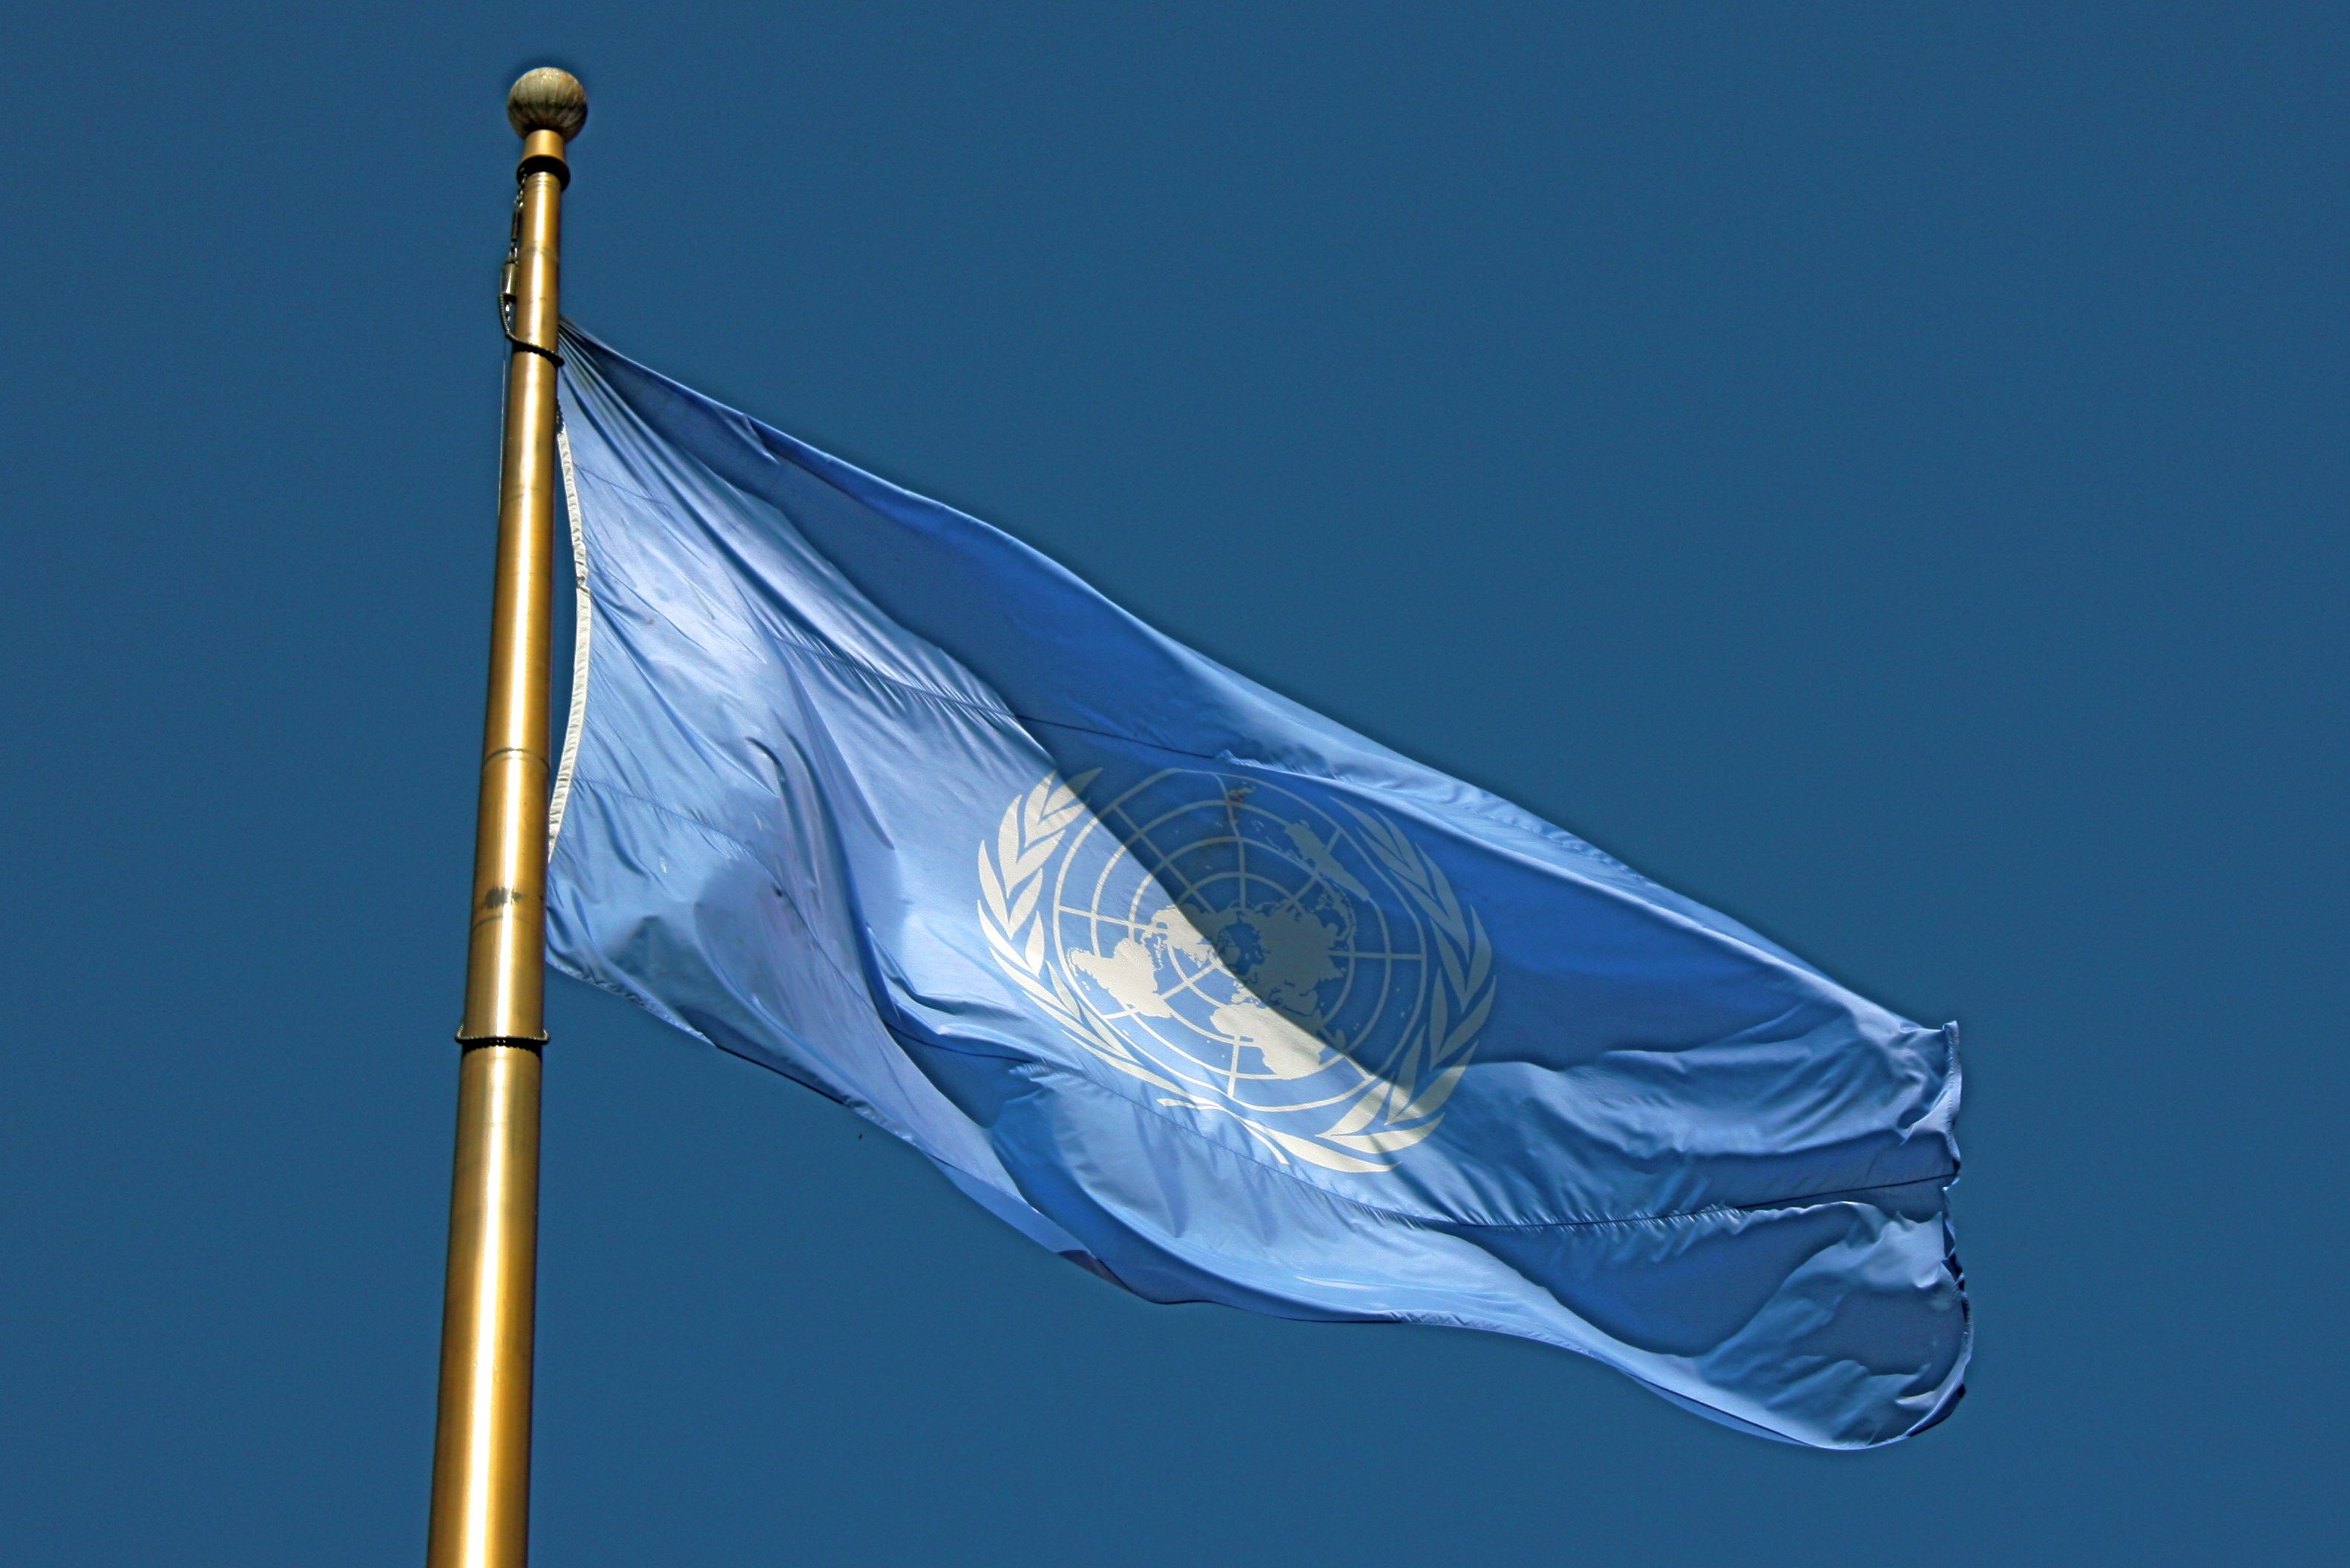 Denmark aiming for UN Human Rights Council position